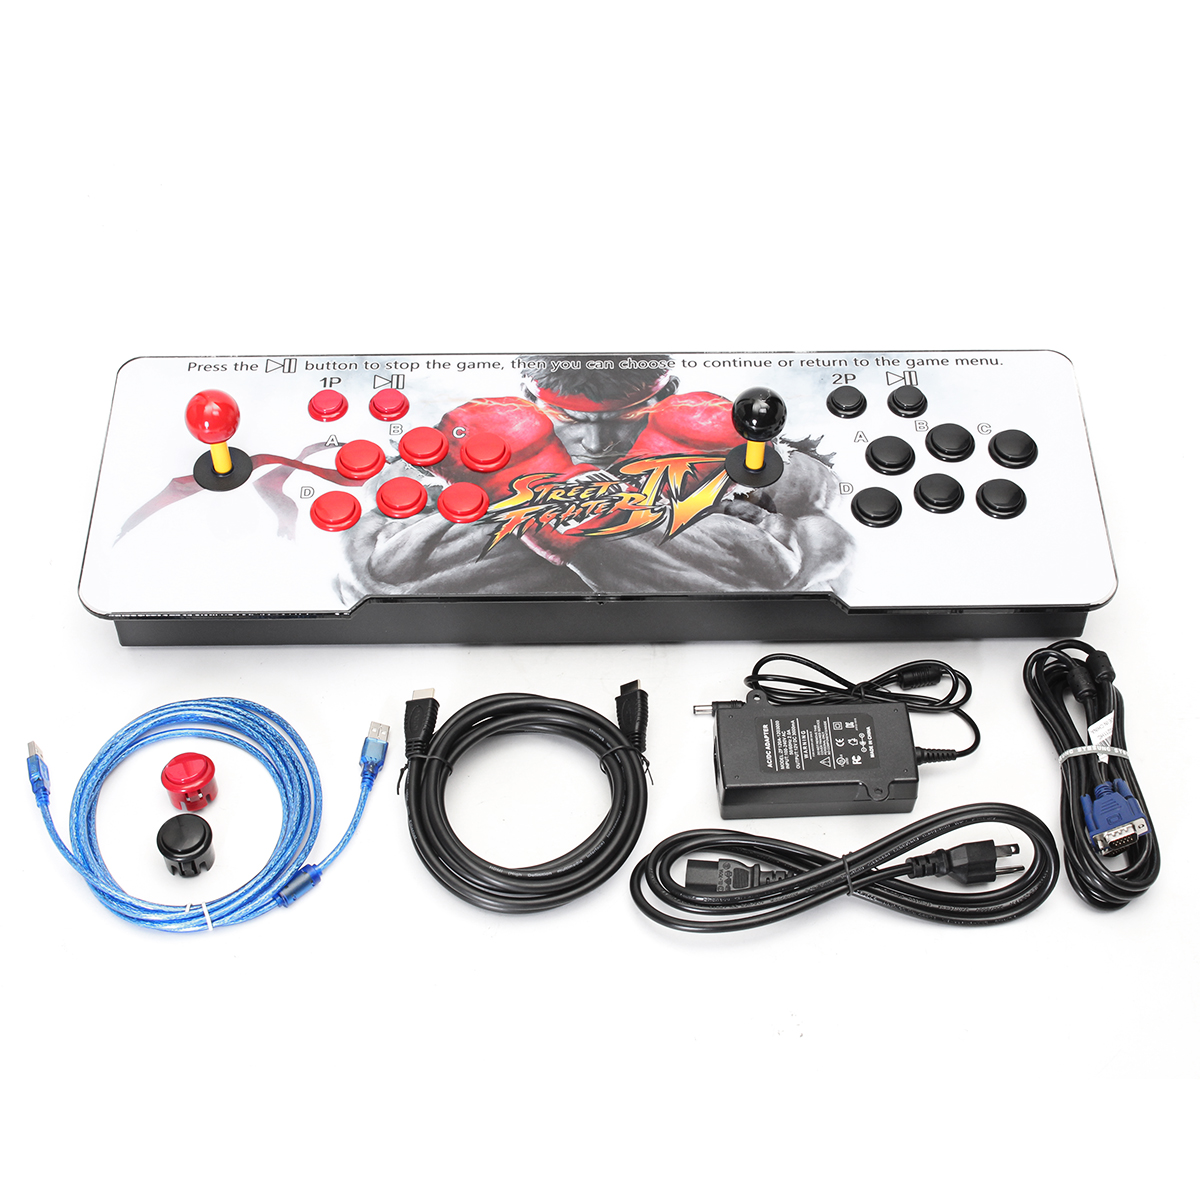 1299-In-1-Arcade-Game-Console-Machine-Video-Games-With-Joystick-Key-VGAHDMIUSB-1310048